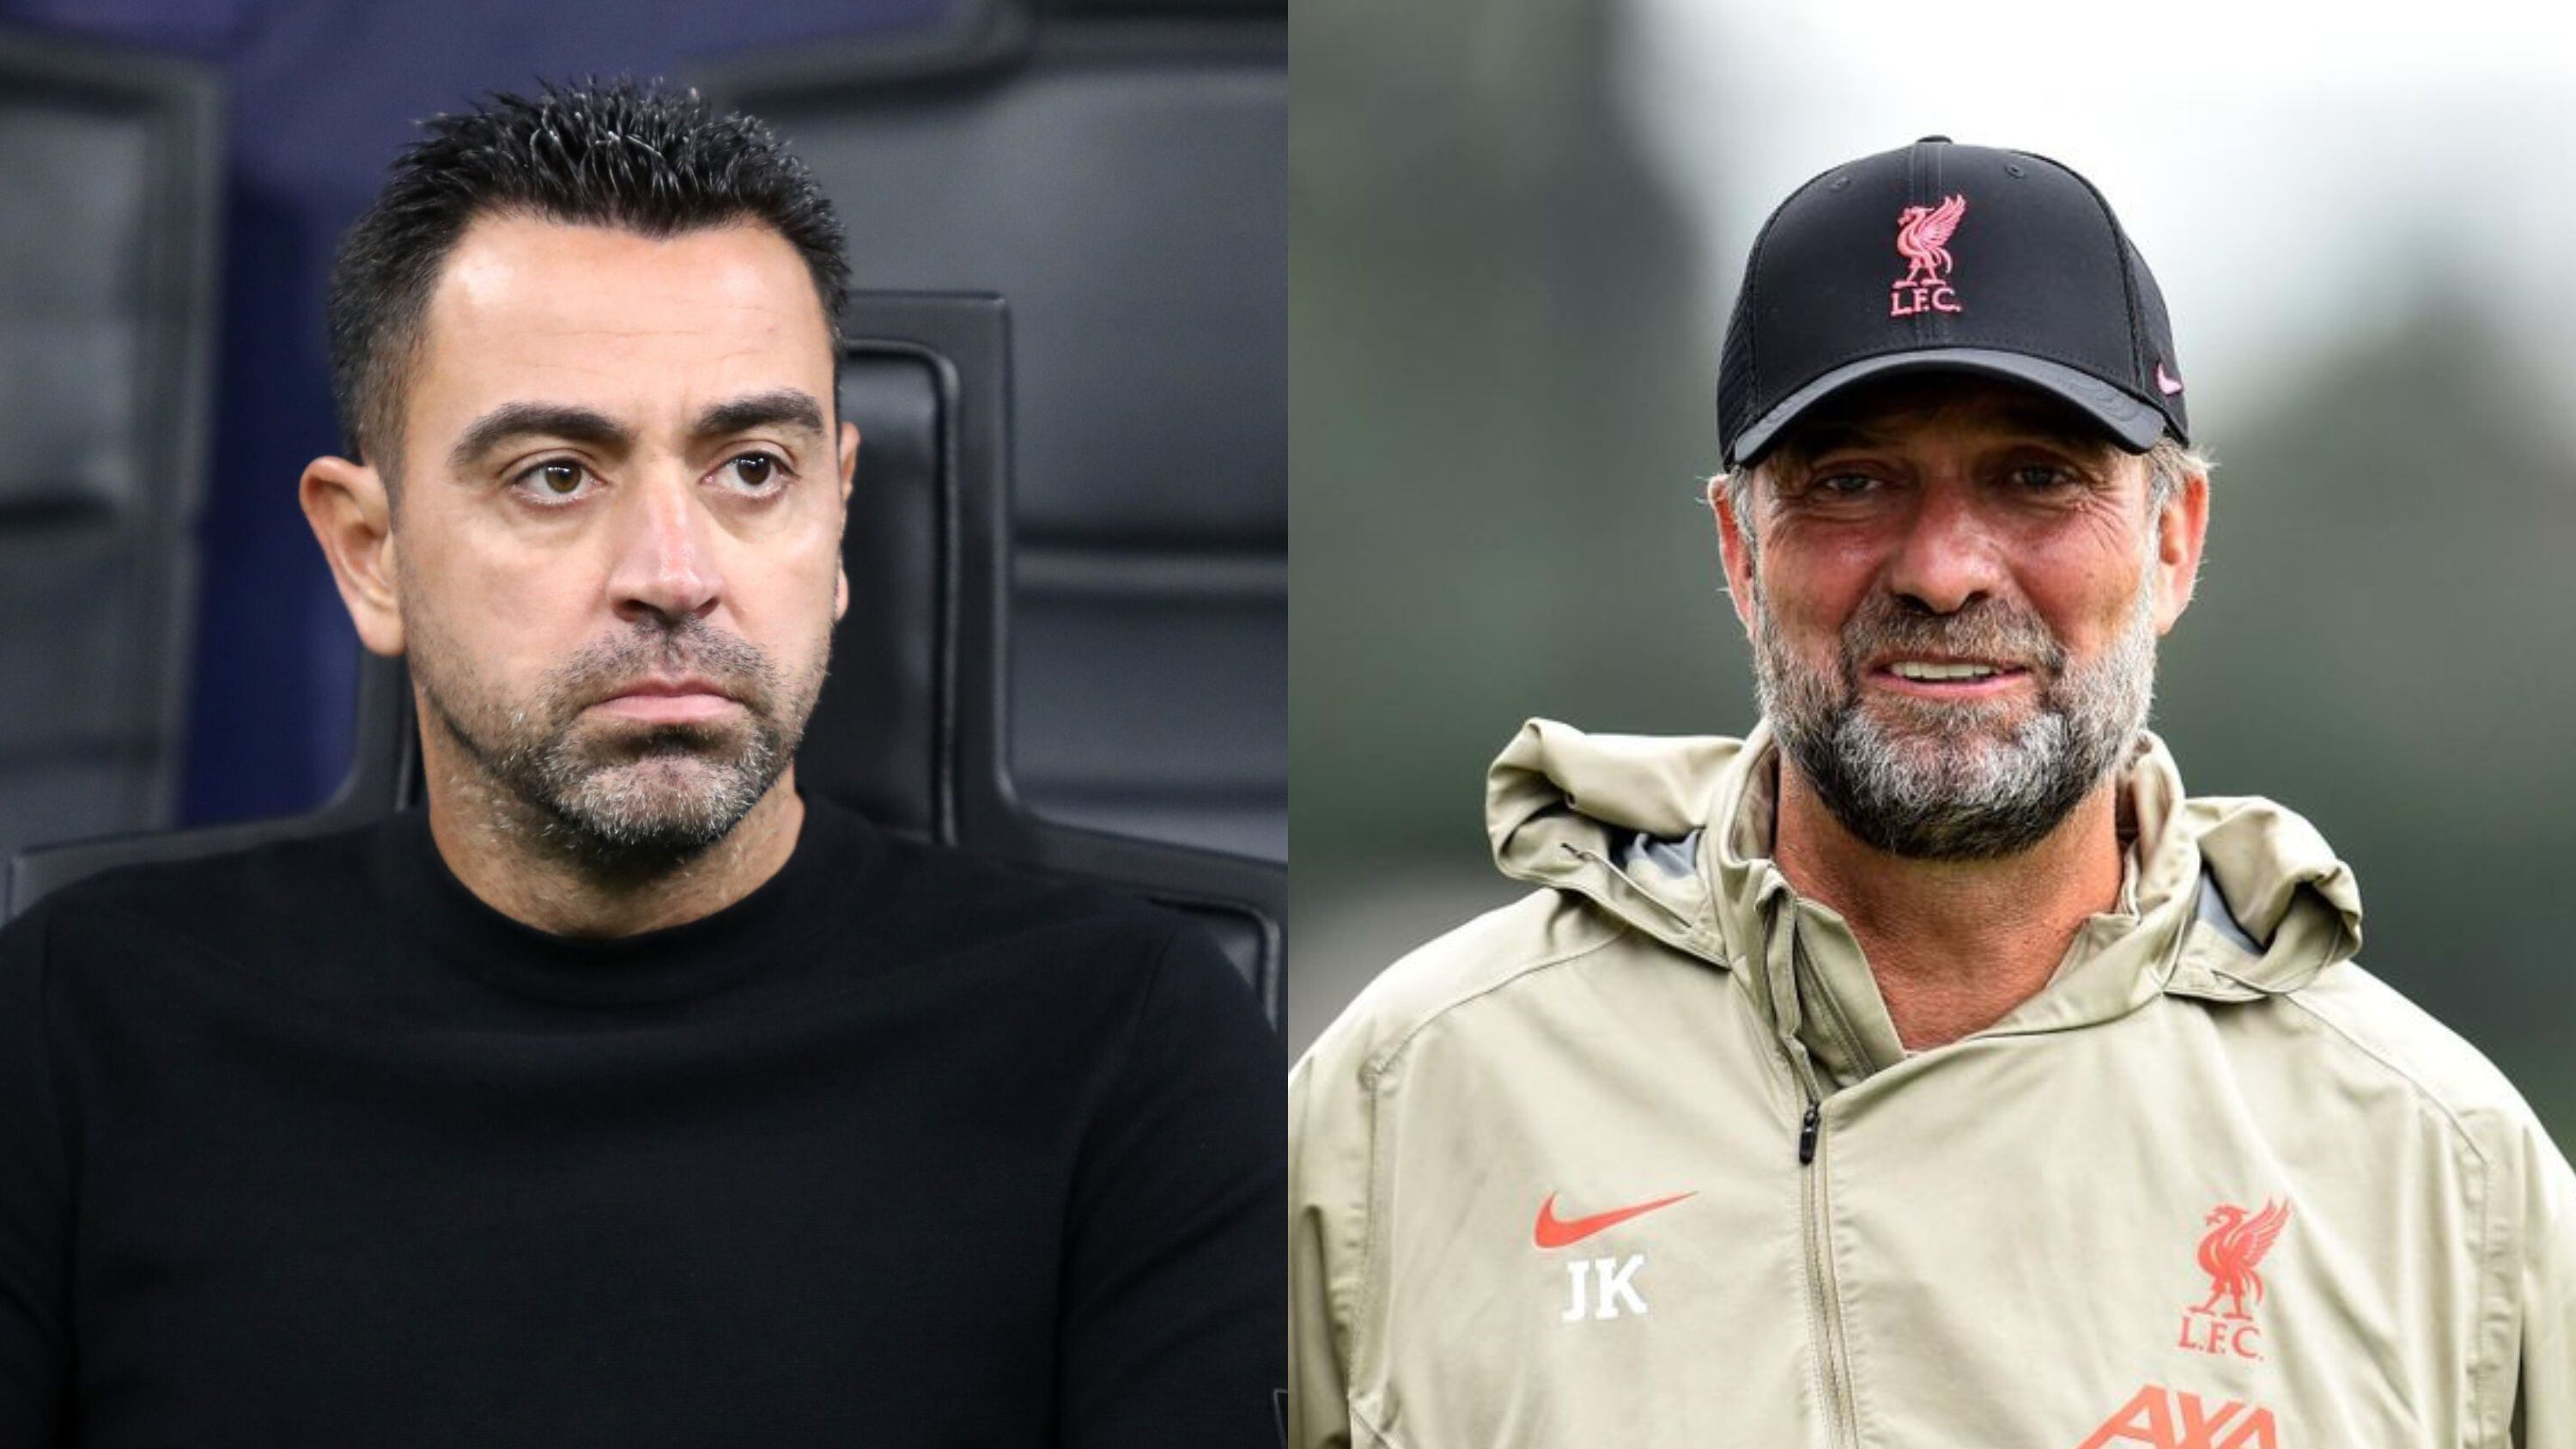 While FC Barcelona will sign Joao Cancelo, Xavi's player who would go to Liverpool FC, Klopp smiles